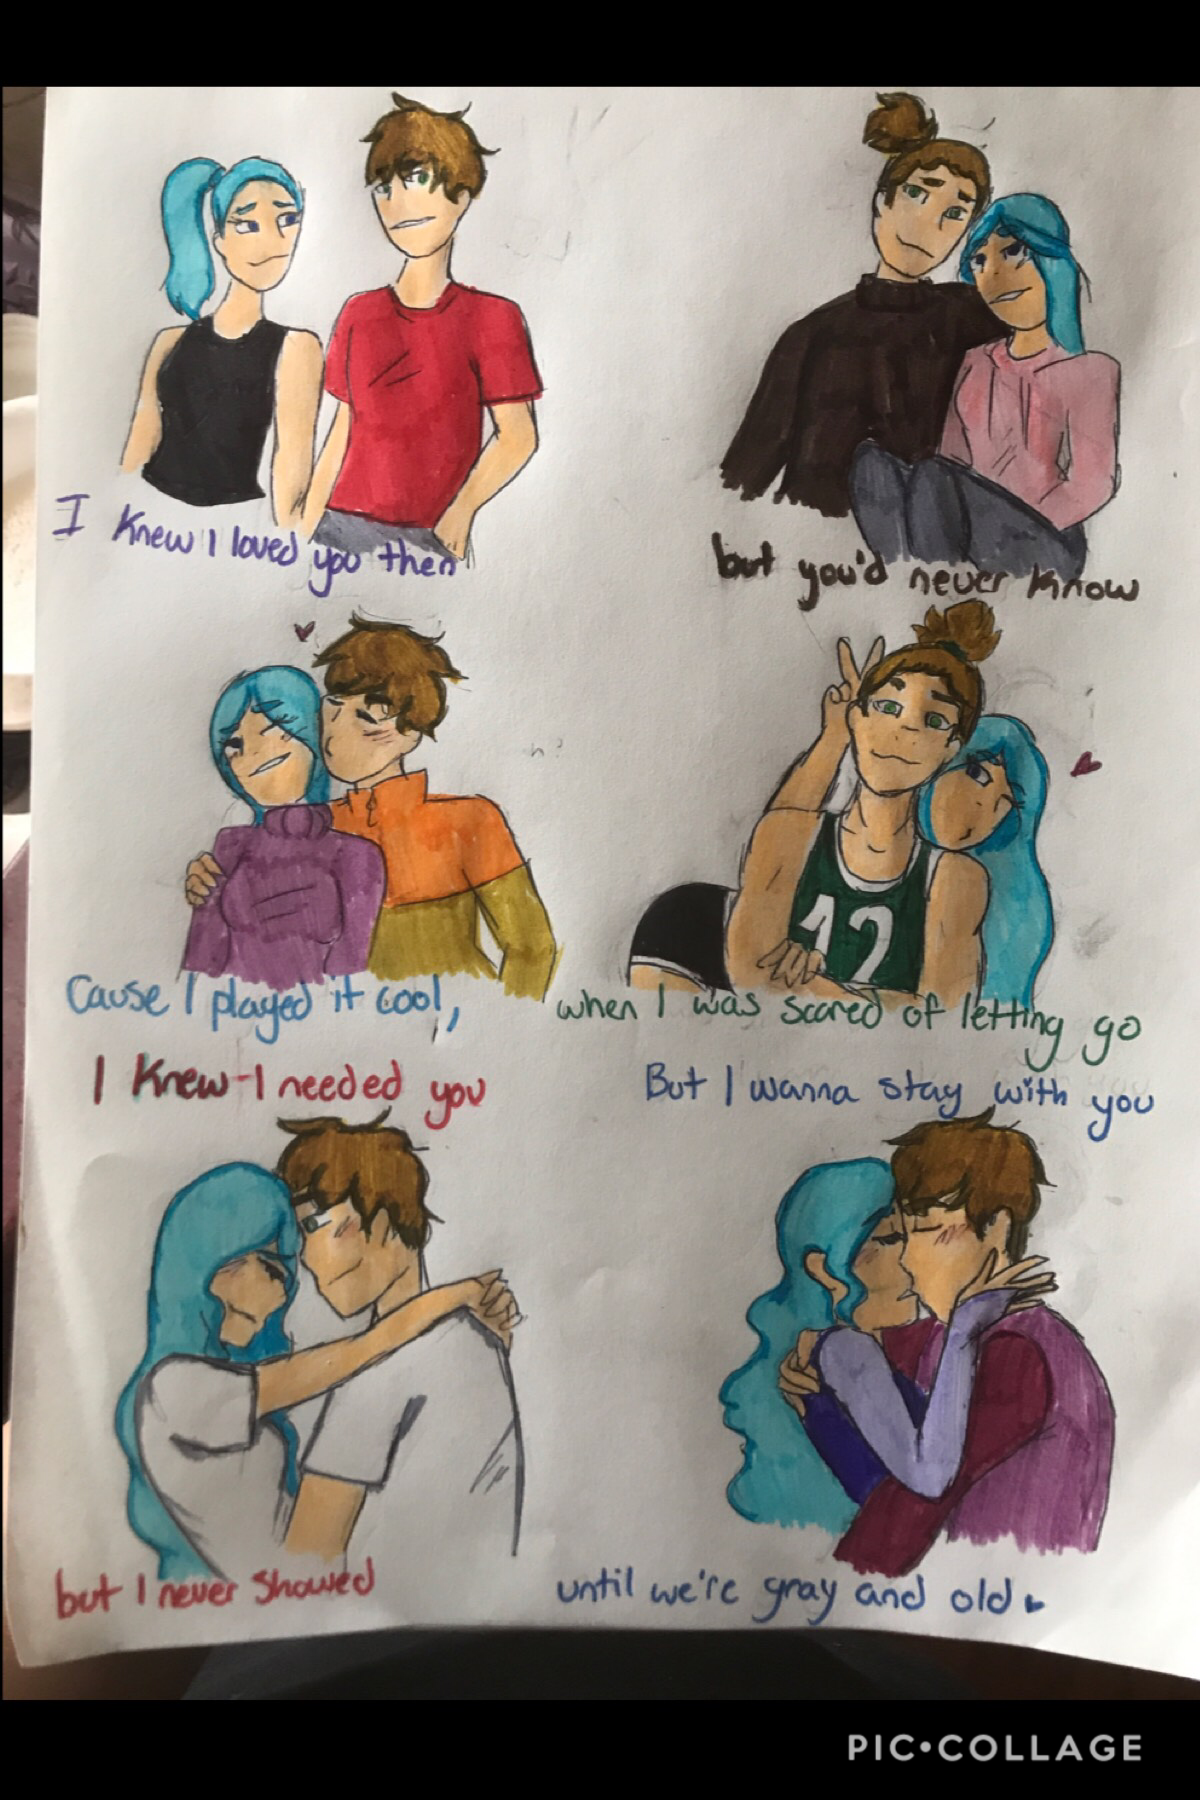 So this took me hours to do including the procrastination :) here’s a montage of Arrow and Frosty with the lyrics from “Say You Won’t Let Go”